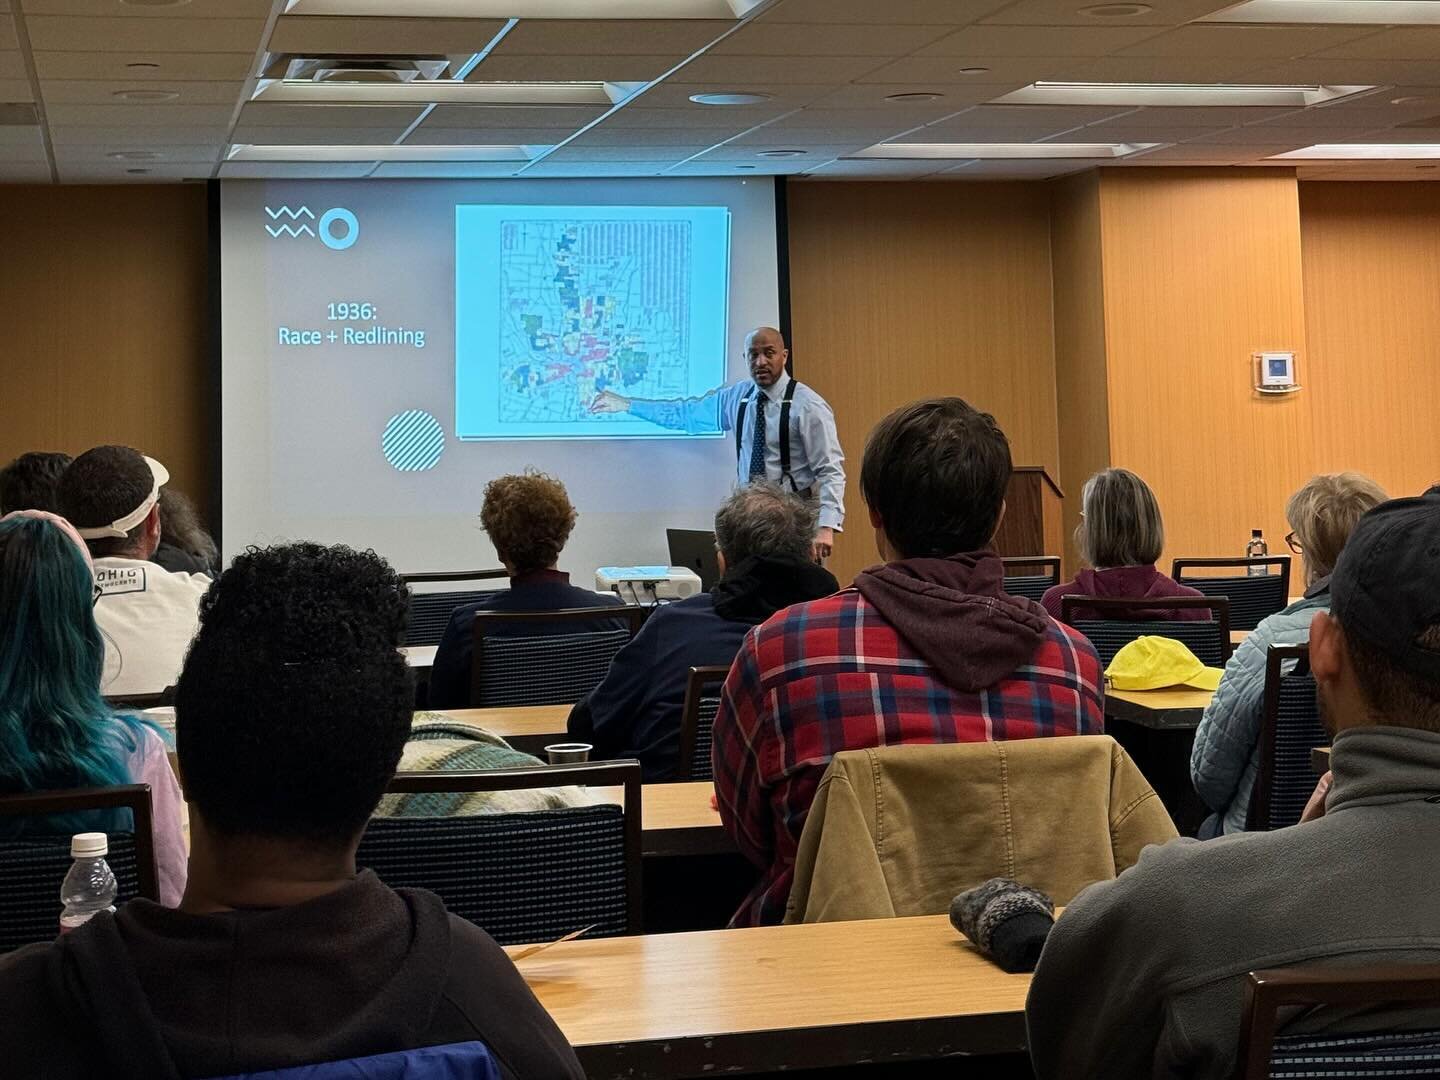 Action Assembly in our Team Ohio trip leveled up when @profjeffries taught our volunteers the history and background of Columbus, OH 👏

Now he&rsquo;s back leading a Foundational Course with @theinstitutecp this month. There&rsquo;s still time to si